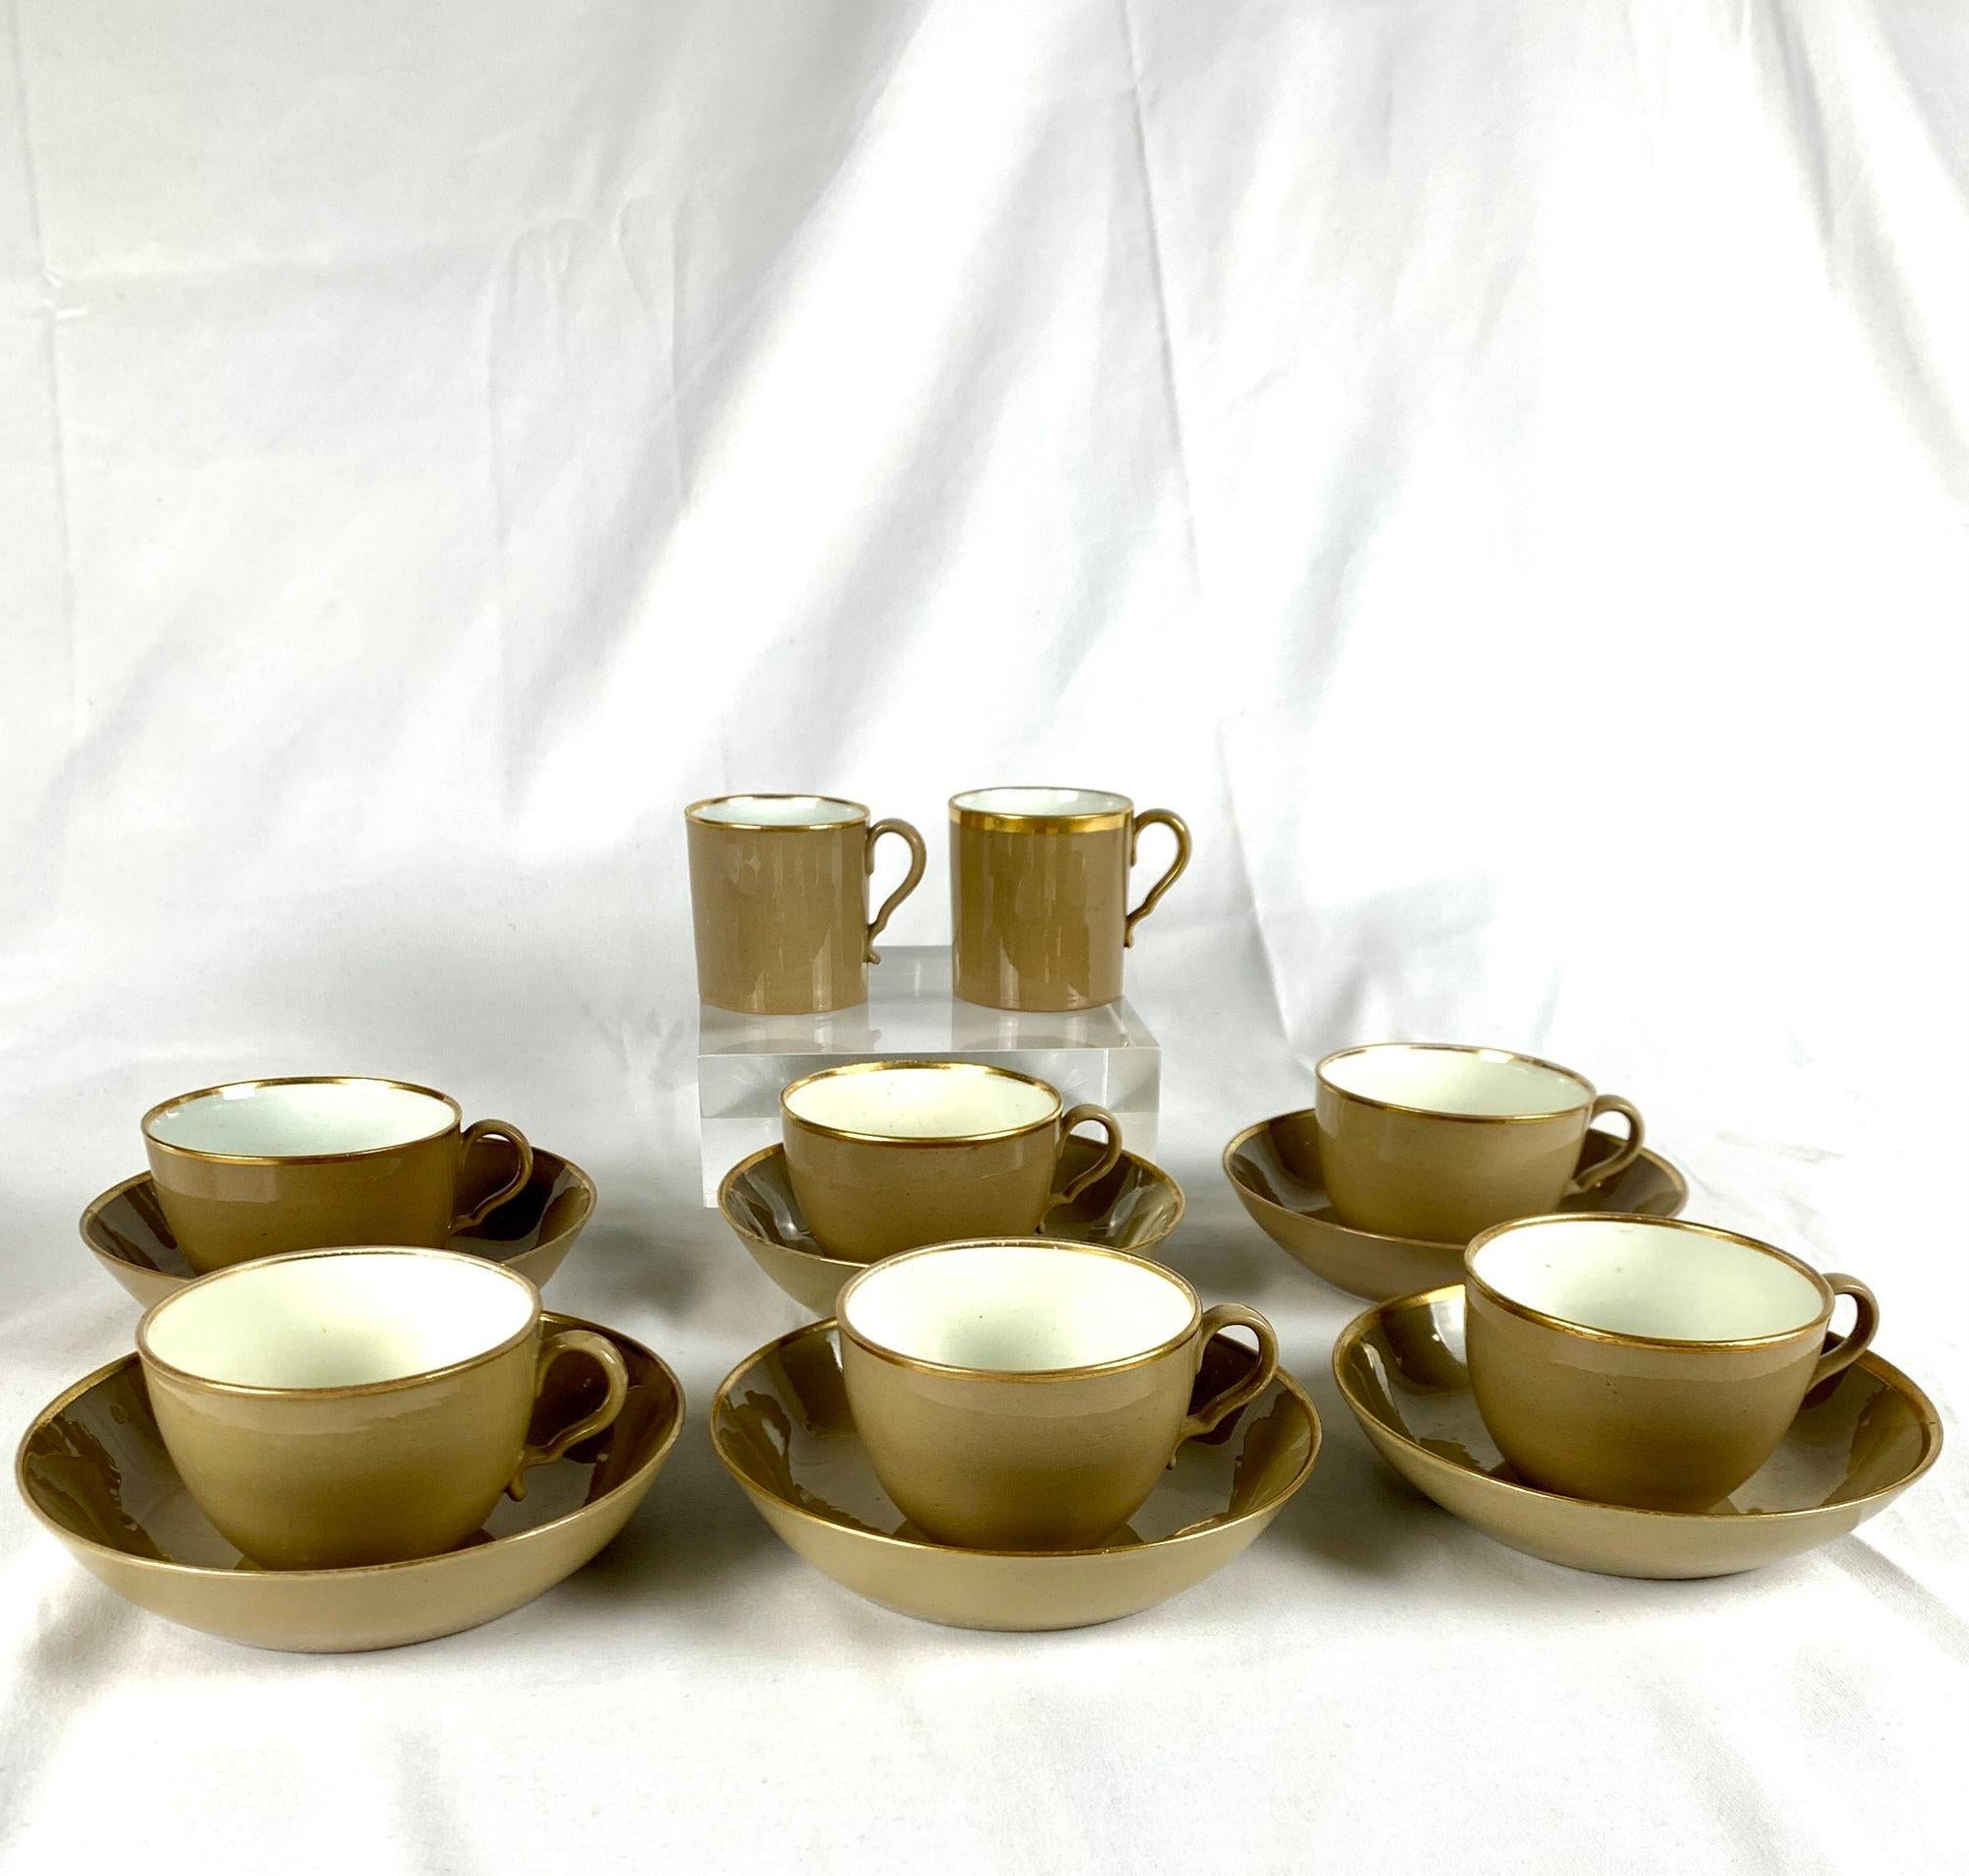 Made in England in the early 19th century, this set of drabware has six tea cups and saucers and a pair of coffee cans.
Unlike other colored earthenwares, which have a white body painted in various colors or tinted with colored glazes, drabware is